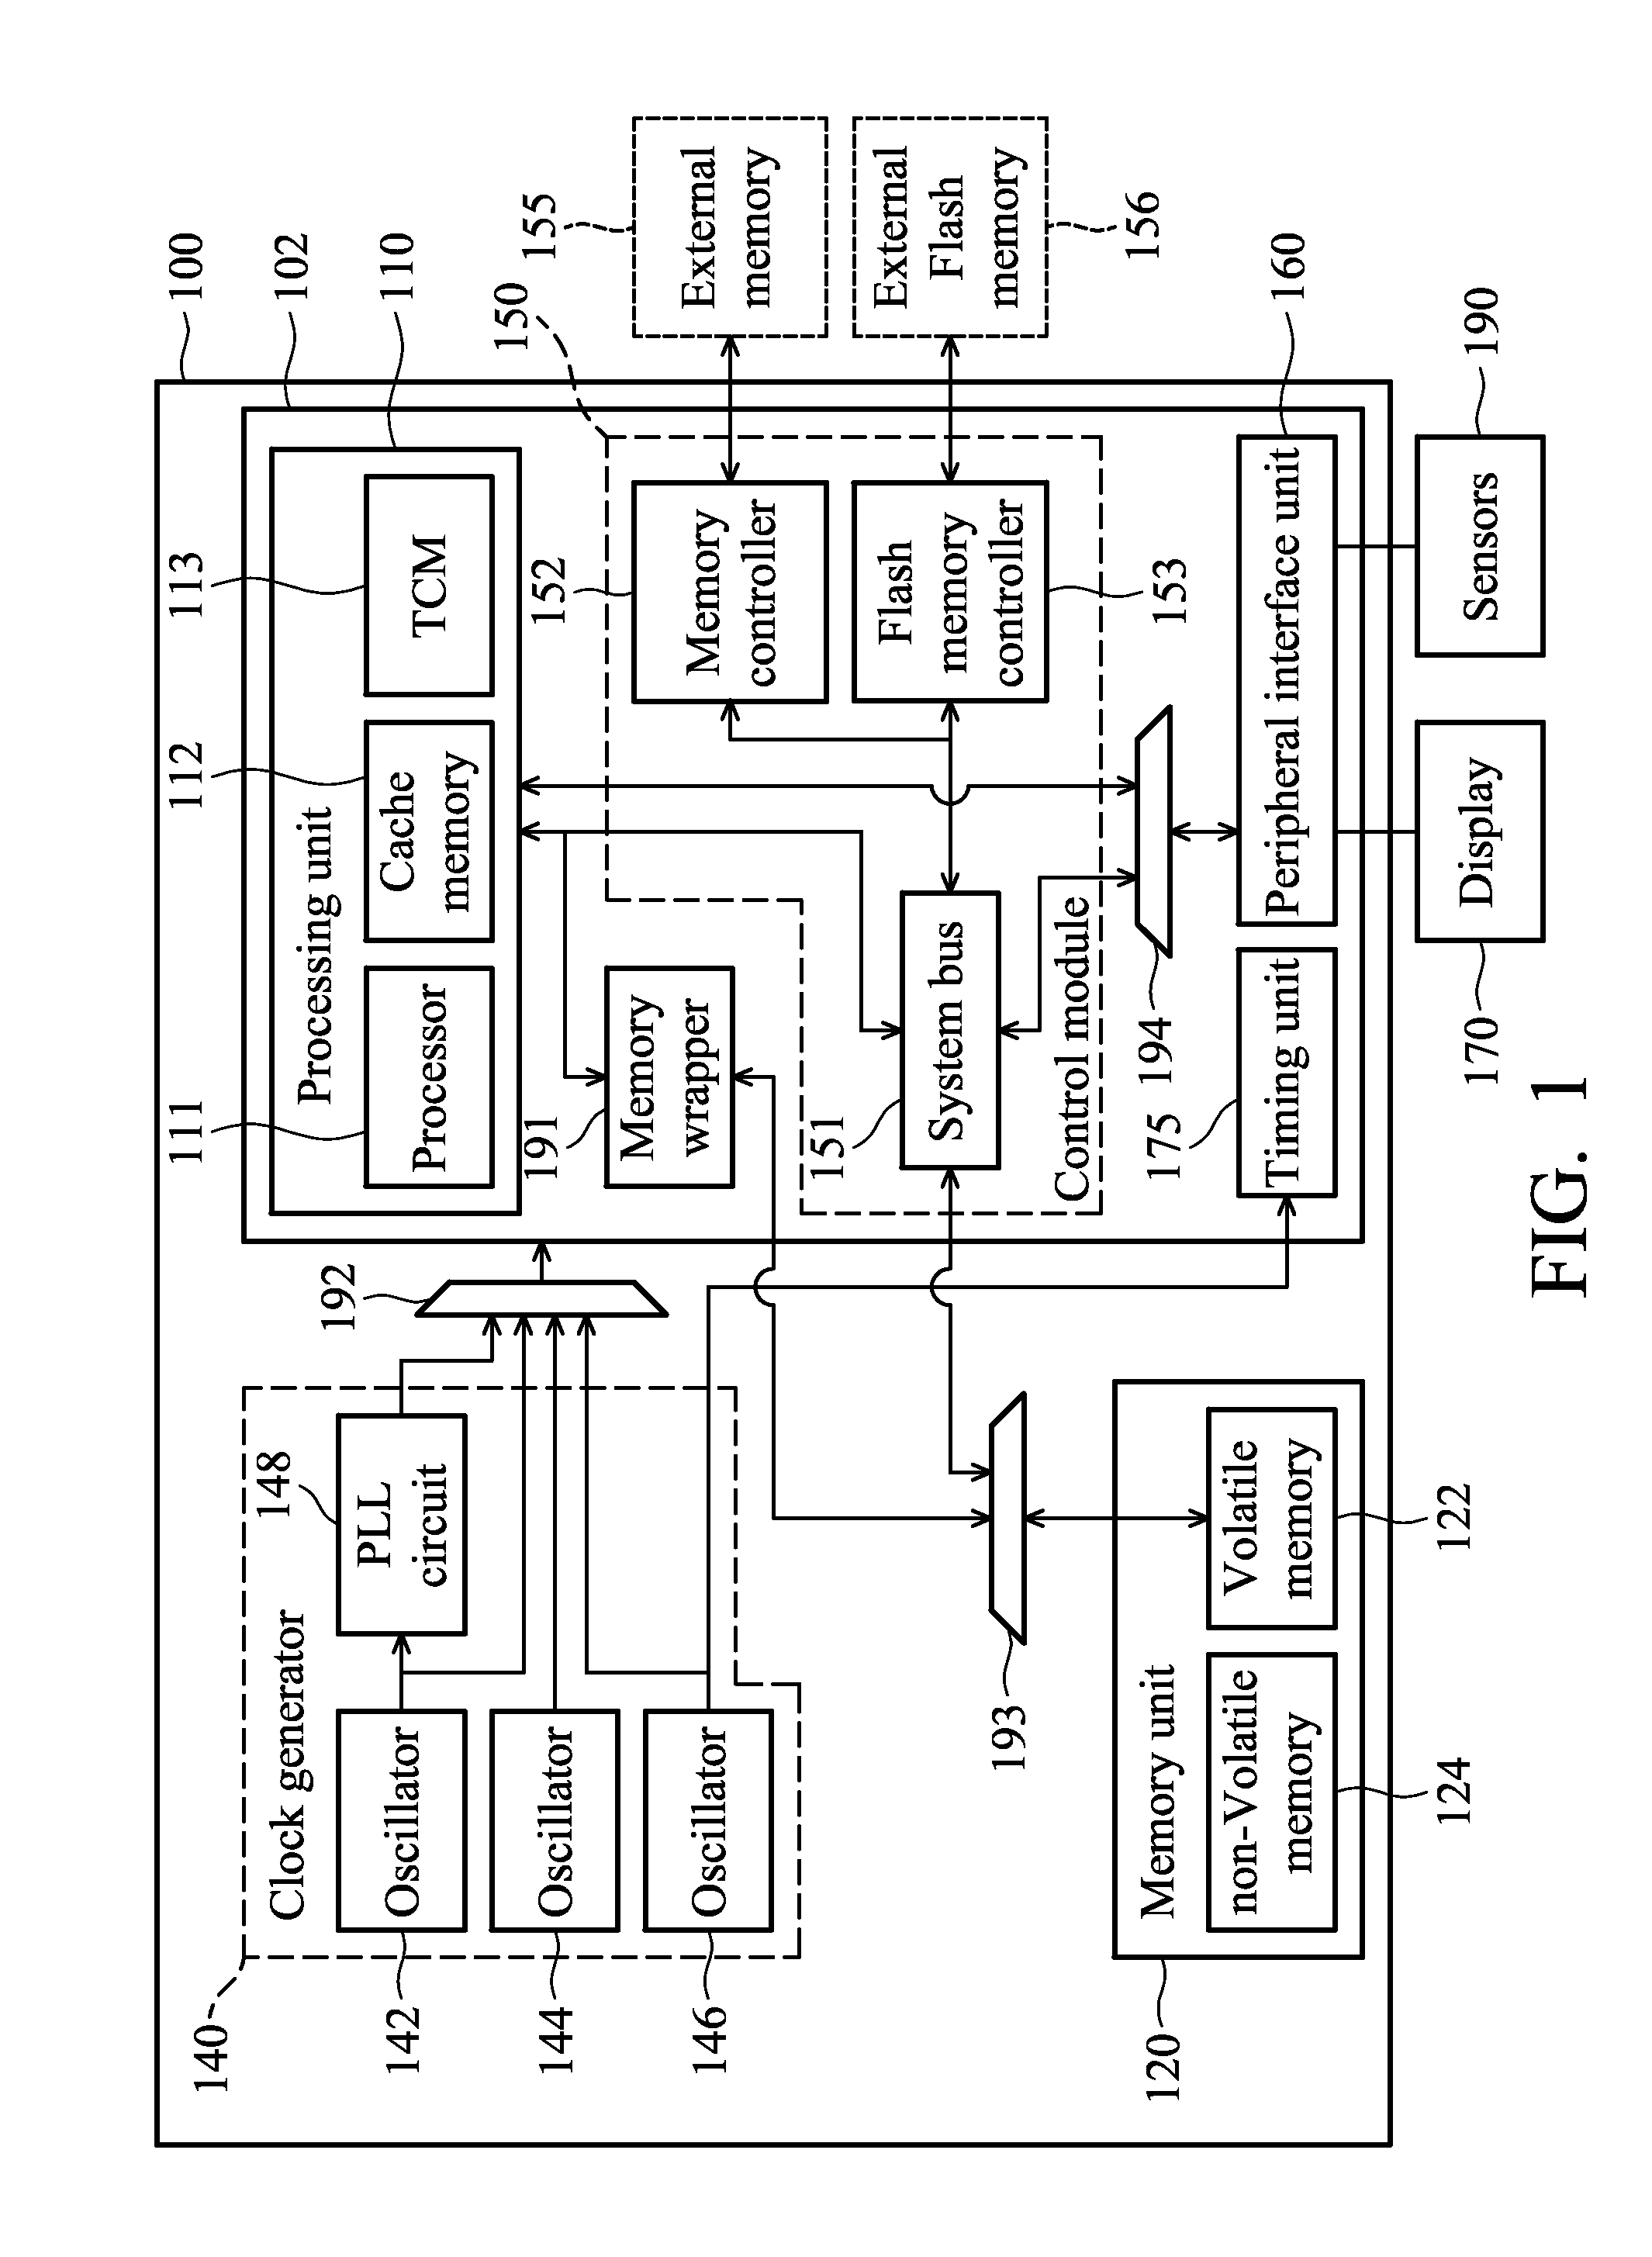 Low-power mechanism for wearable controller and associated control method